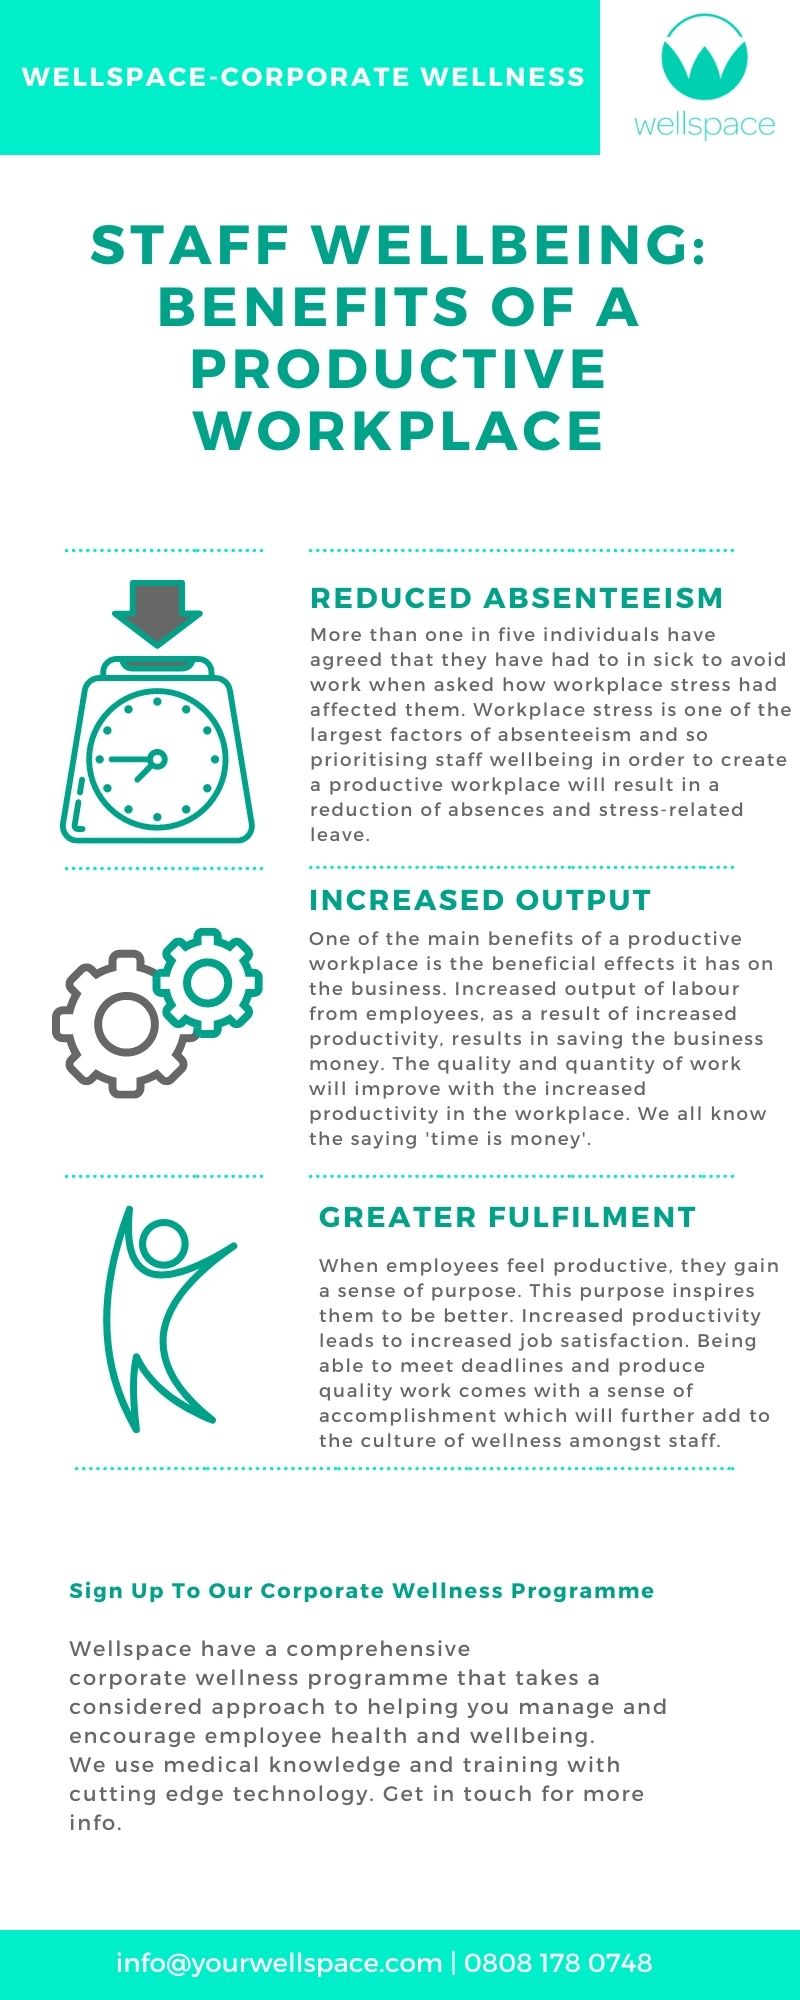 Staff Wellbeing: Benefits Of A Productive Workplace – Infographic